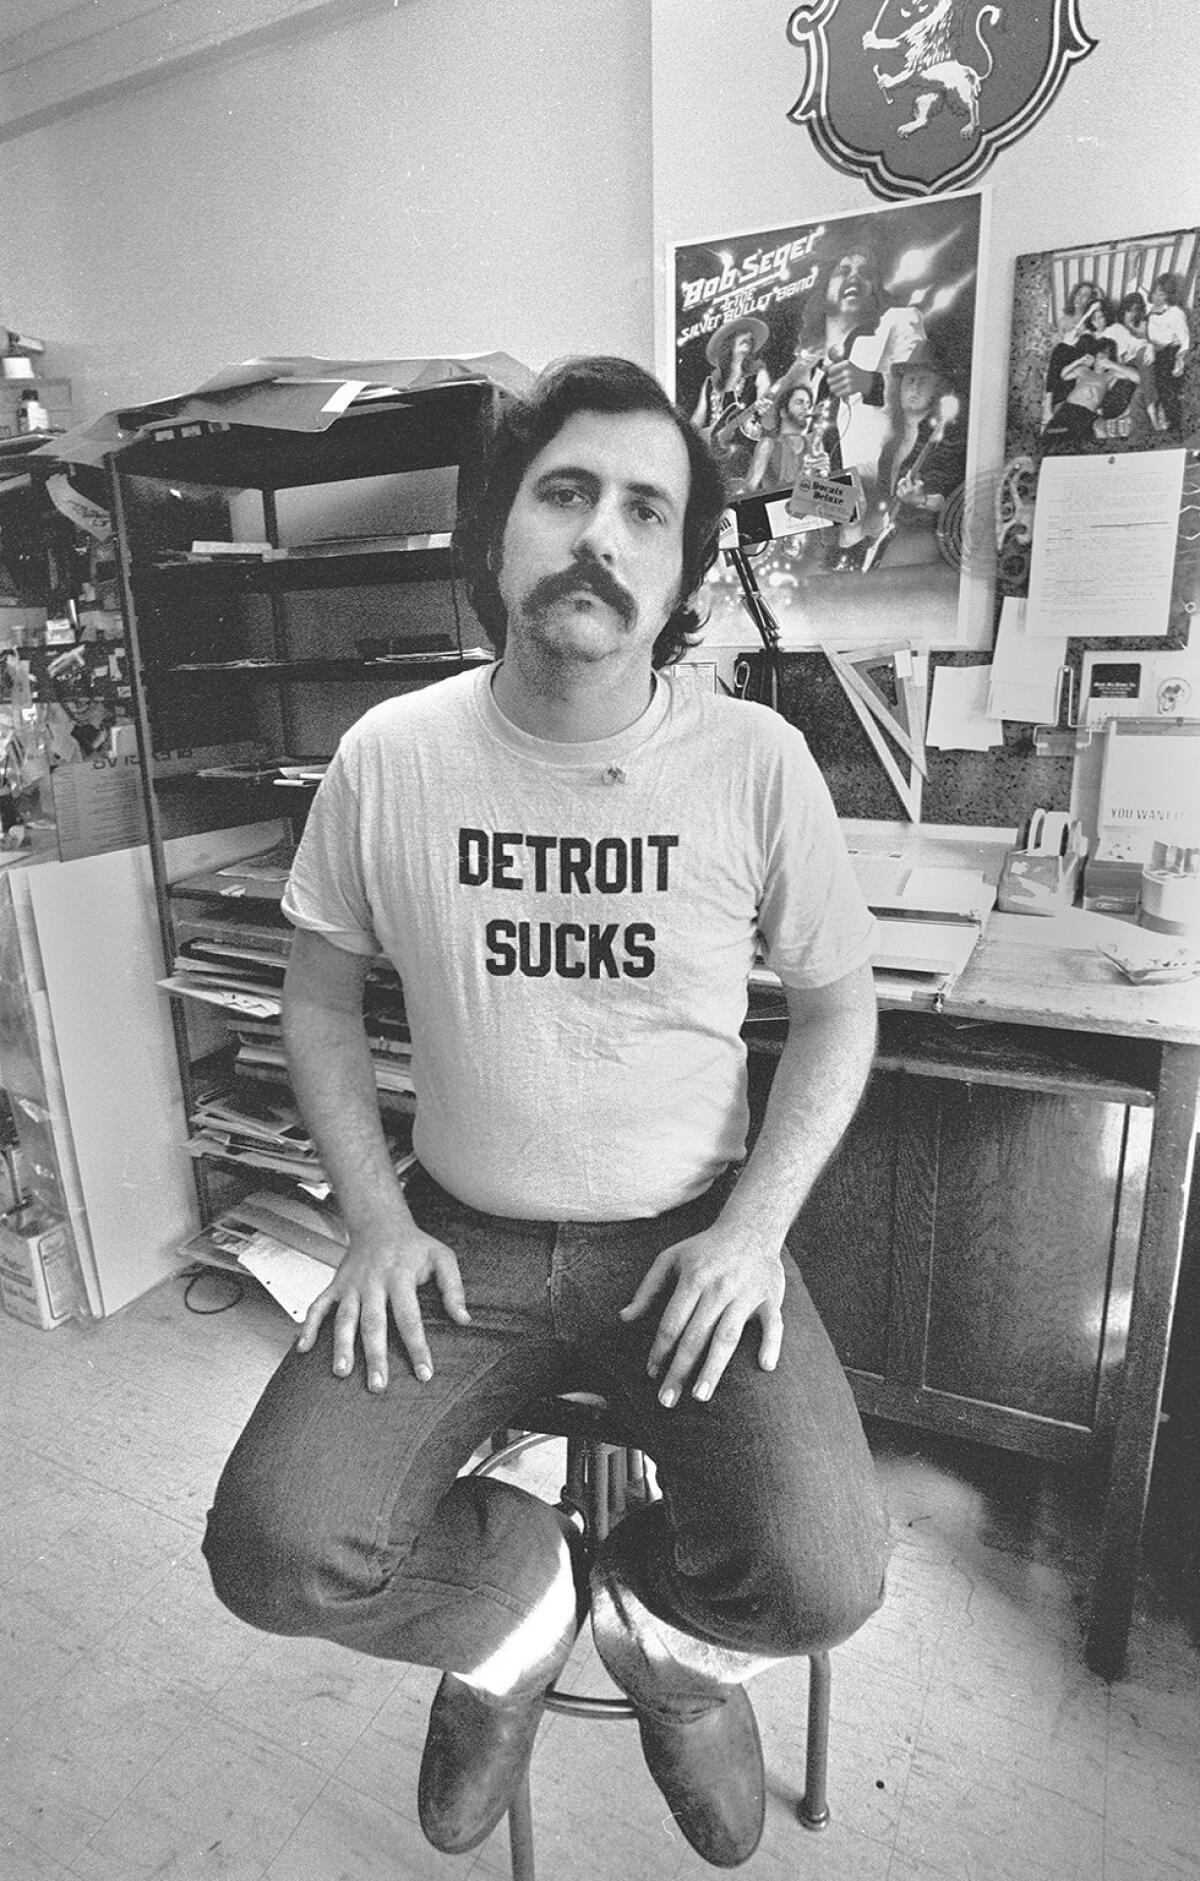 A black-and-white photo of a mustached man in a T-shirt that says "Detroit Sucks," sitting on a stool.